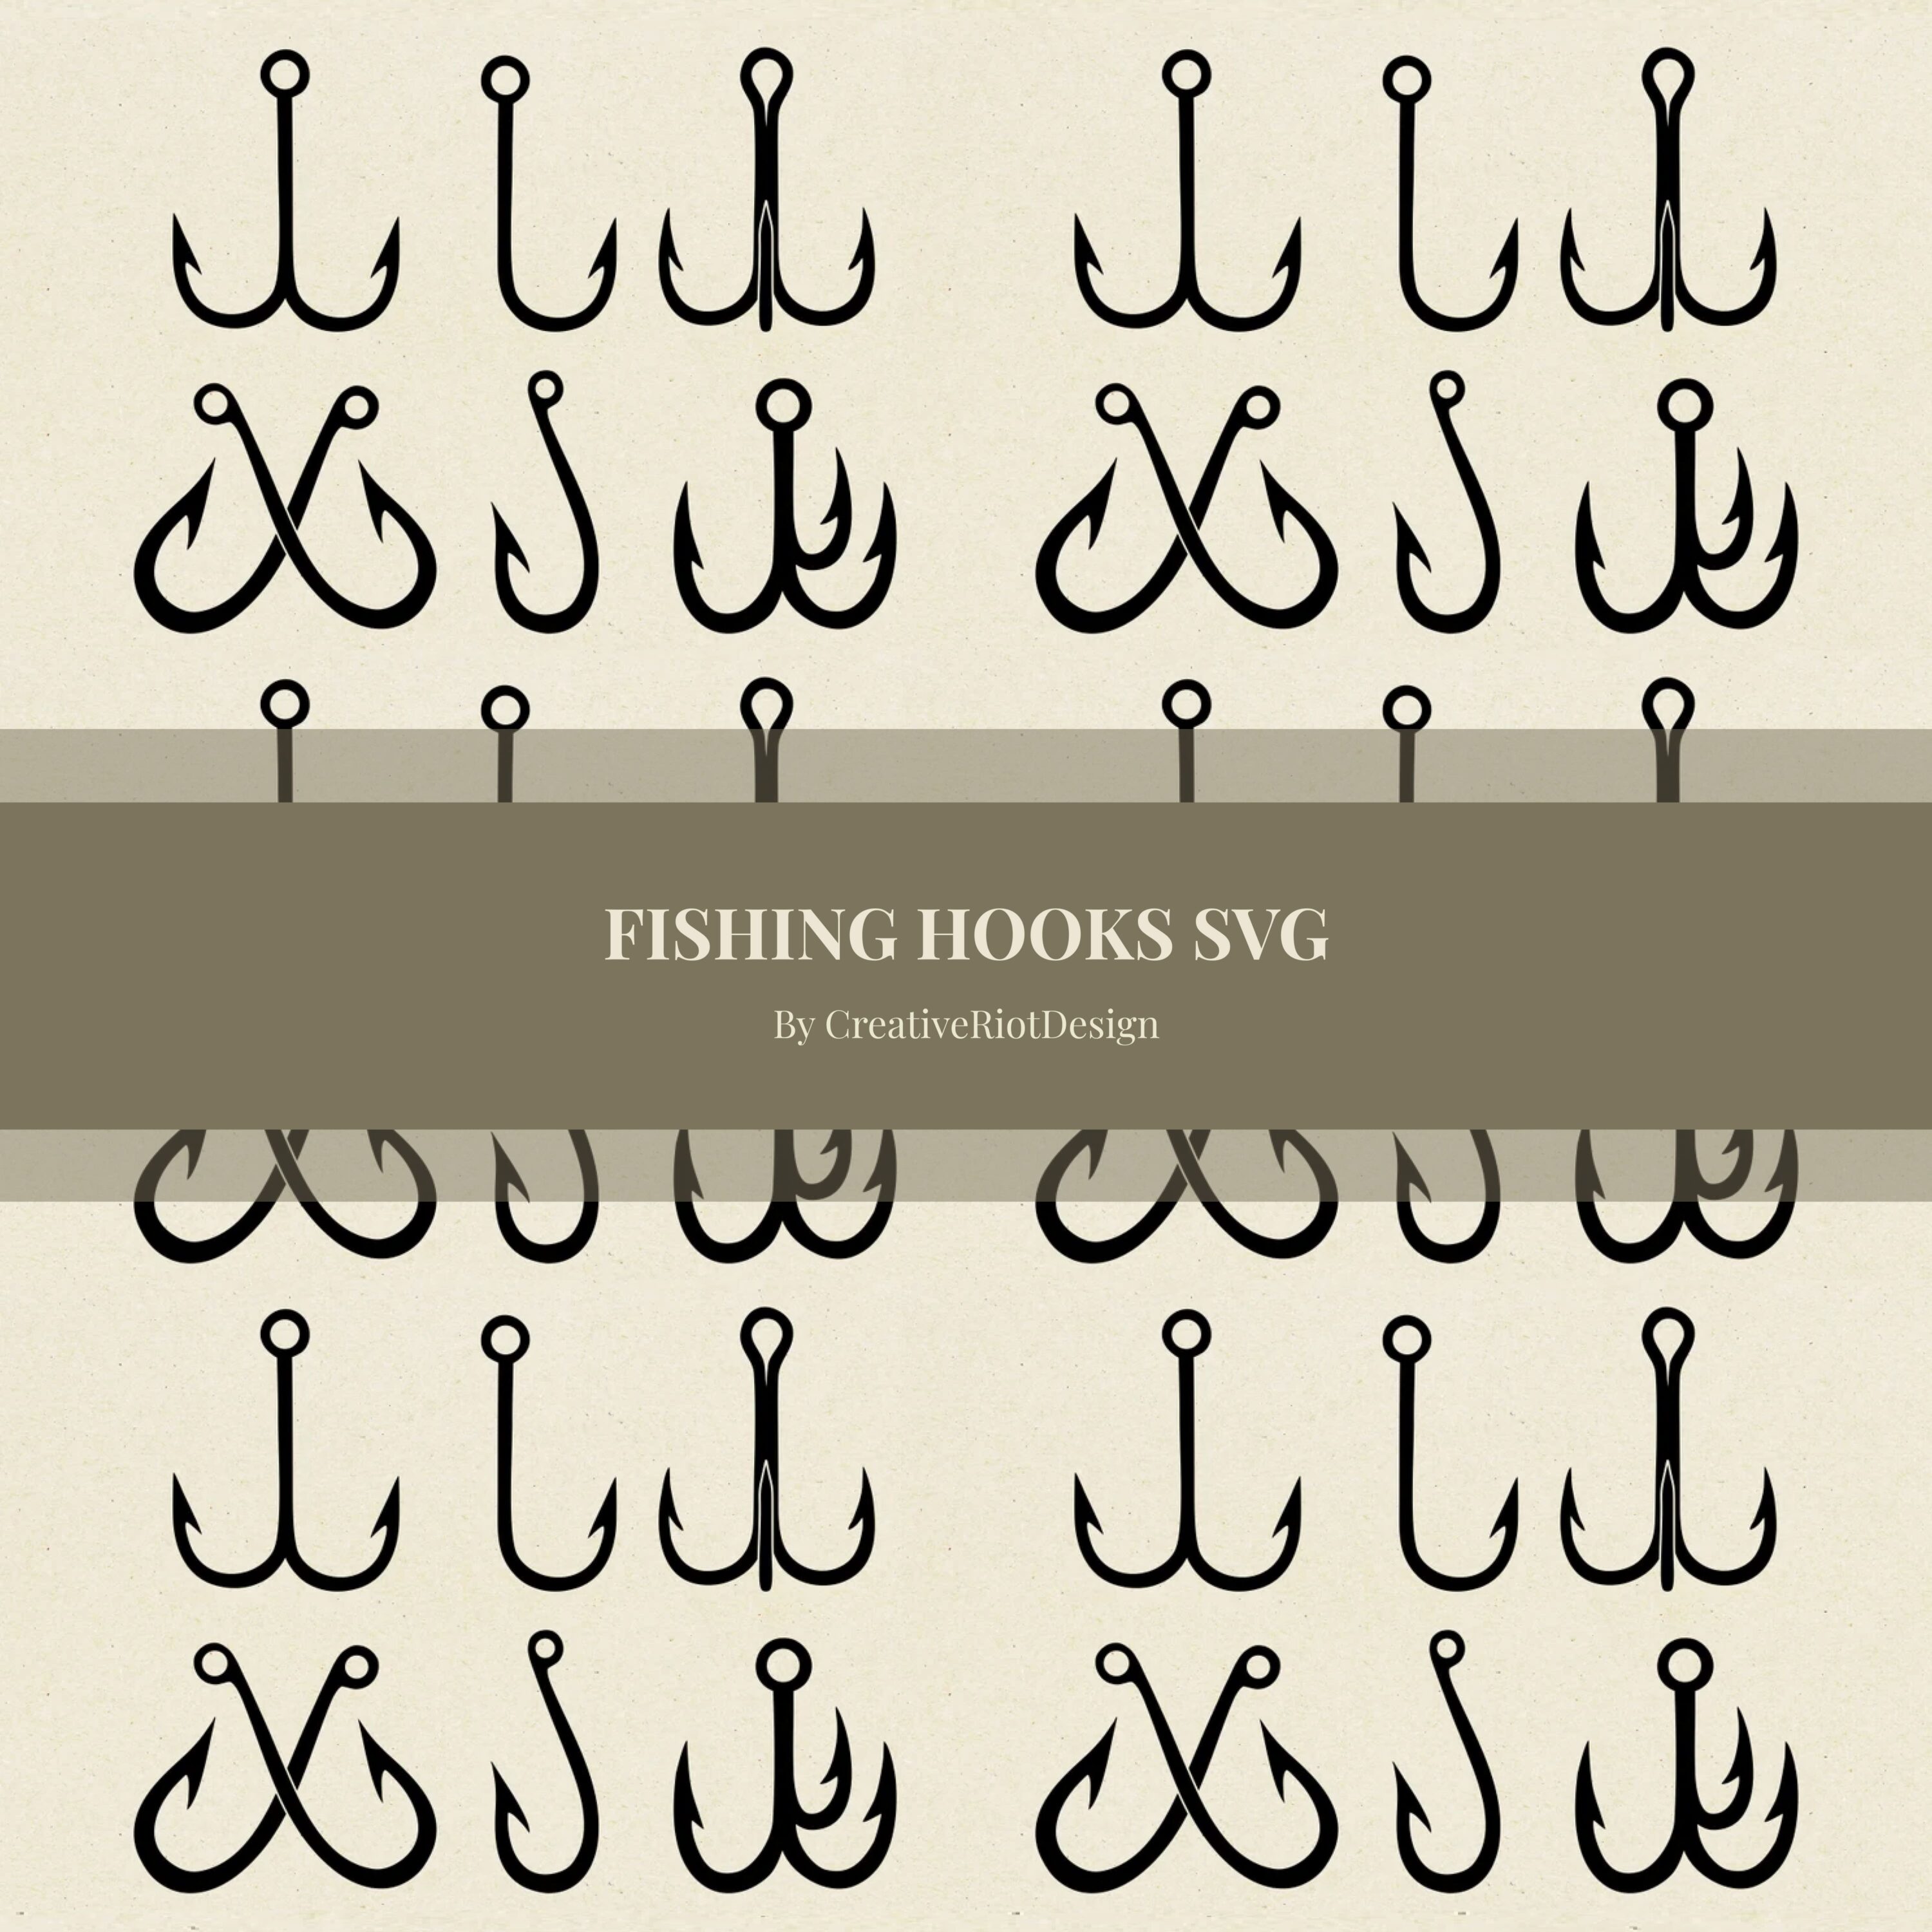 Fishing Hooks SVG - Fishing Svg, Commercial Use Svg cover.